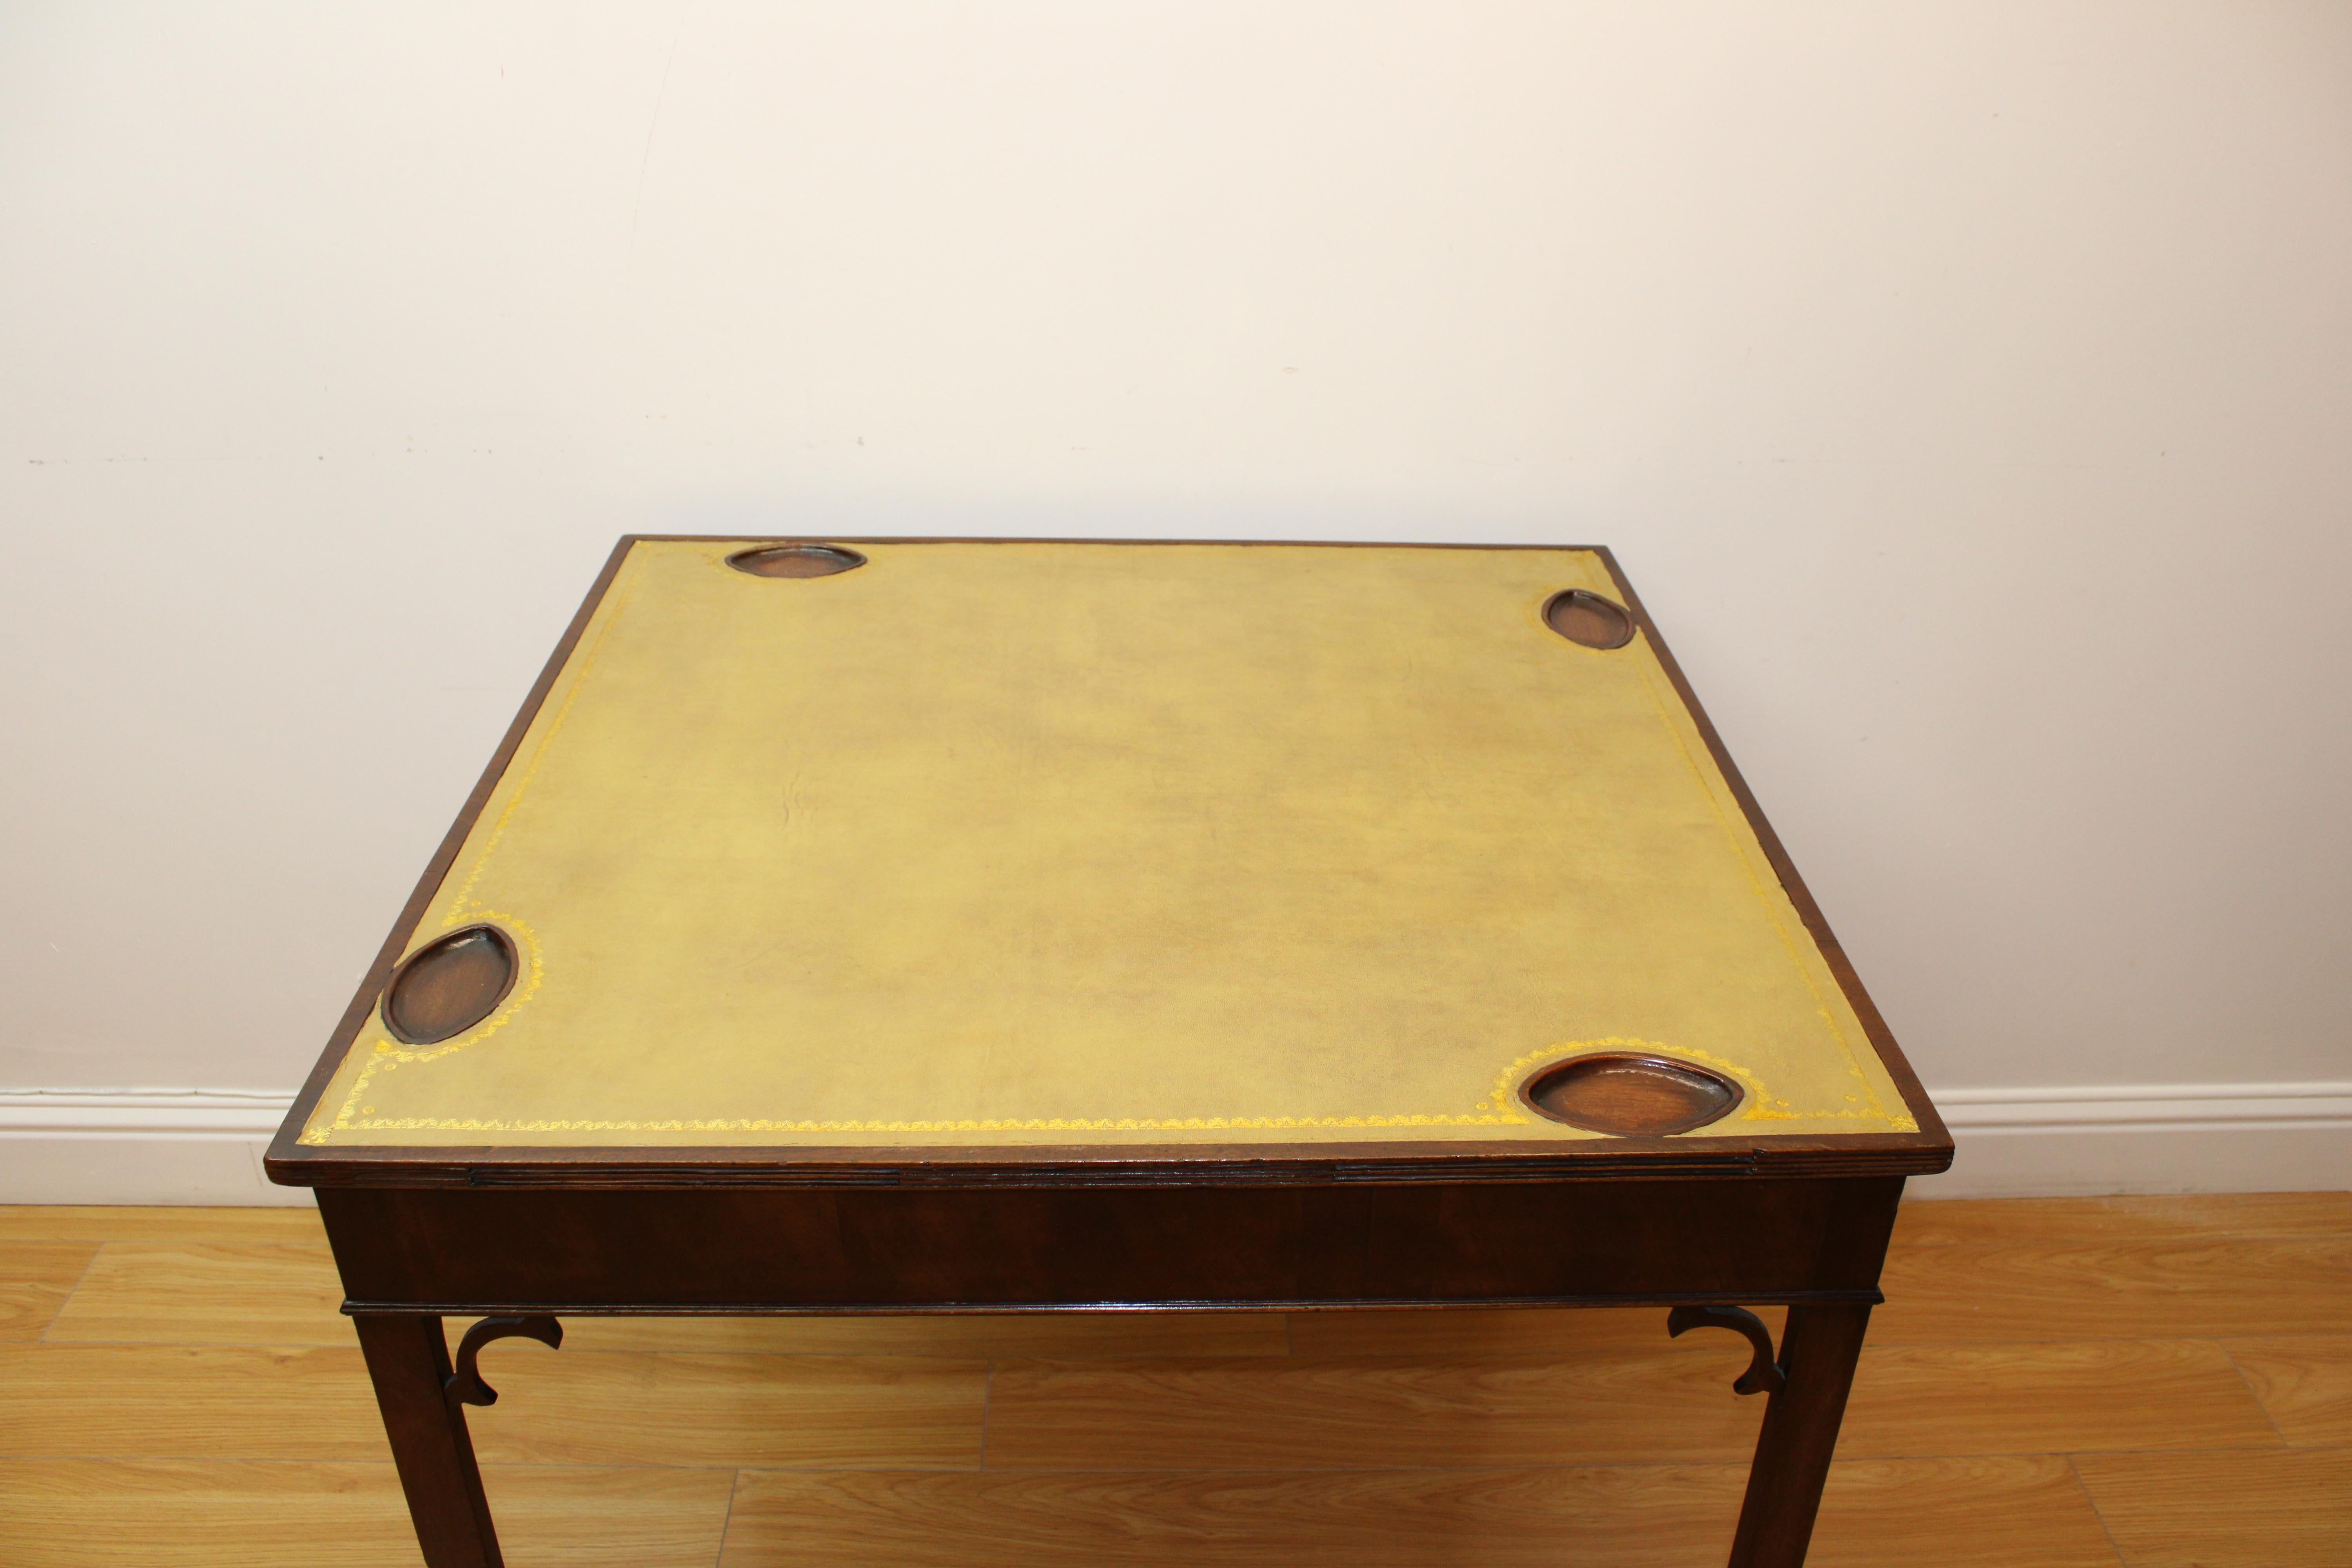 C. early 20th century

Games Table w/ tooled leather top & inserts for chips.